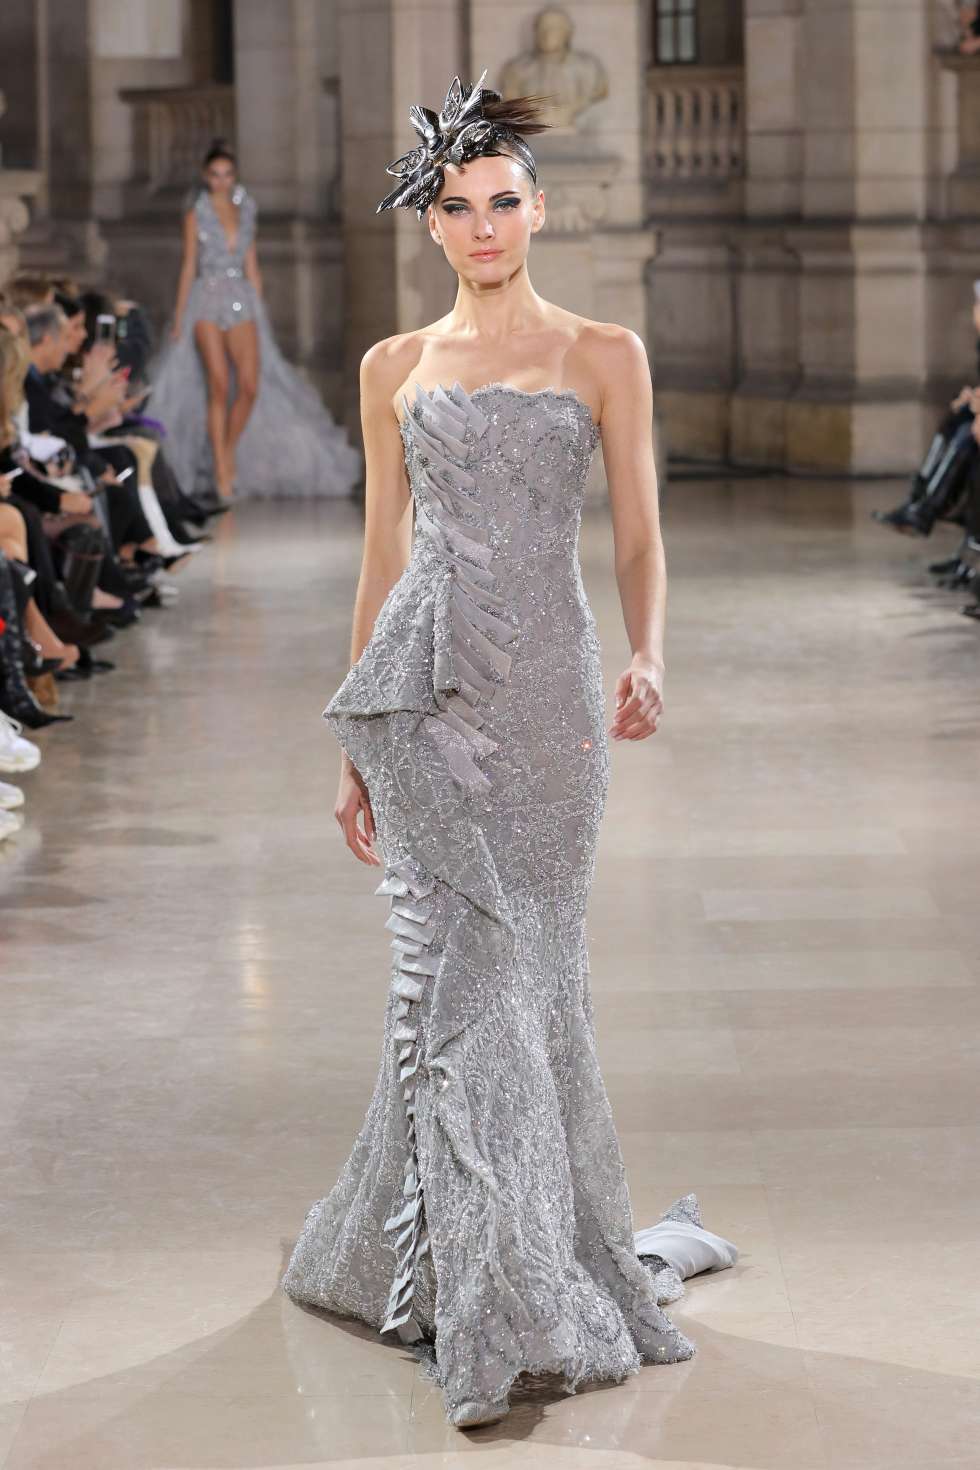 Your 2019 Engagement Dress from Tony Wards 2019 SS Collection